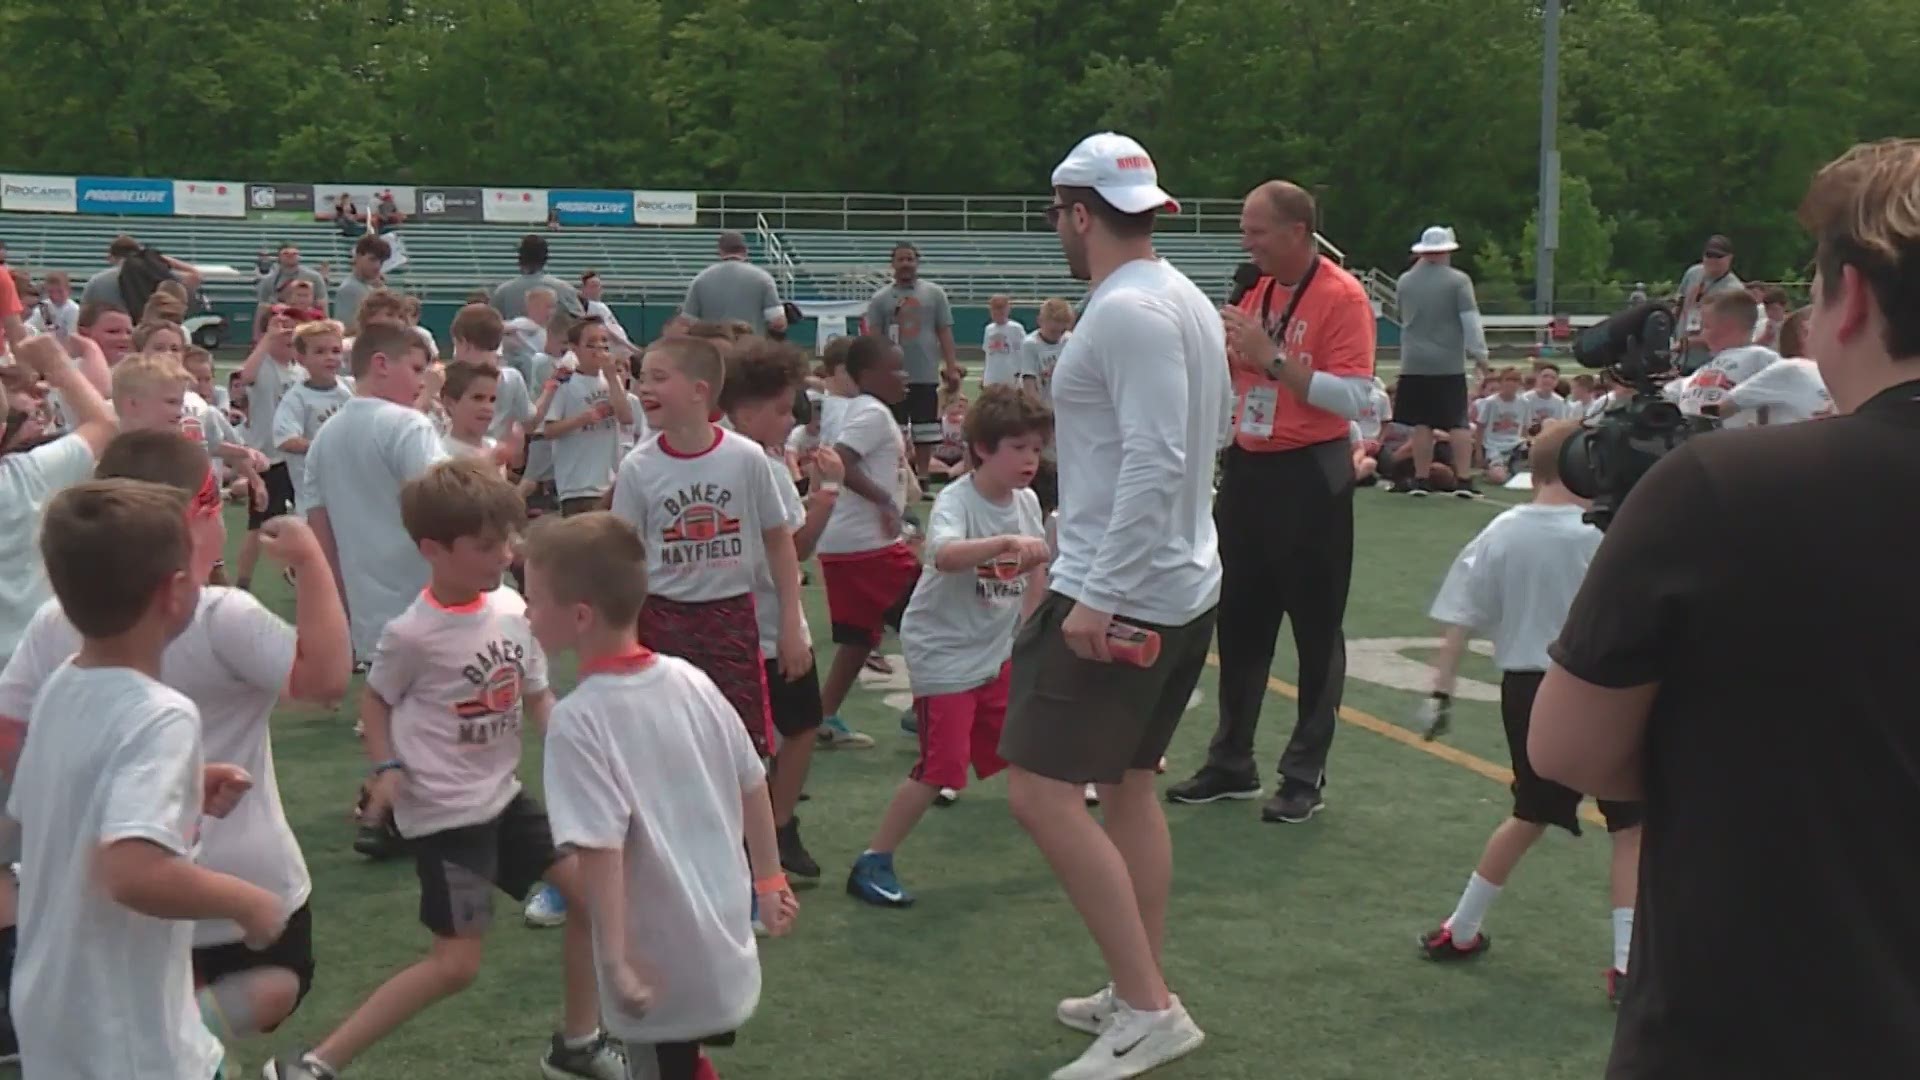 Baker Mayfield showed off his dance moves during his first football camp since joining the Browns. More than 500 kids grades 1 through 8 are learning from the star quarterback this weekend at Mayfield High School.